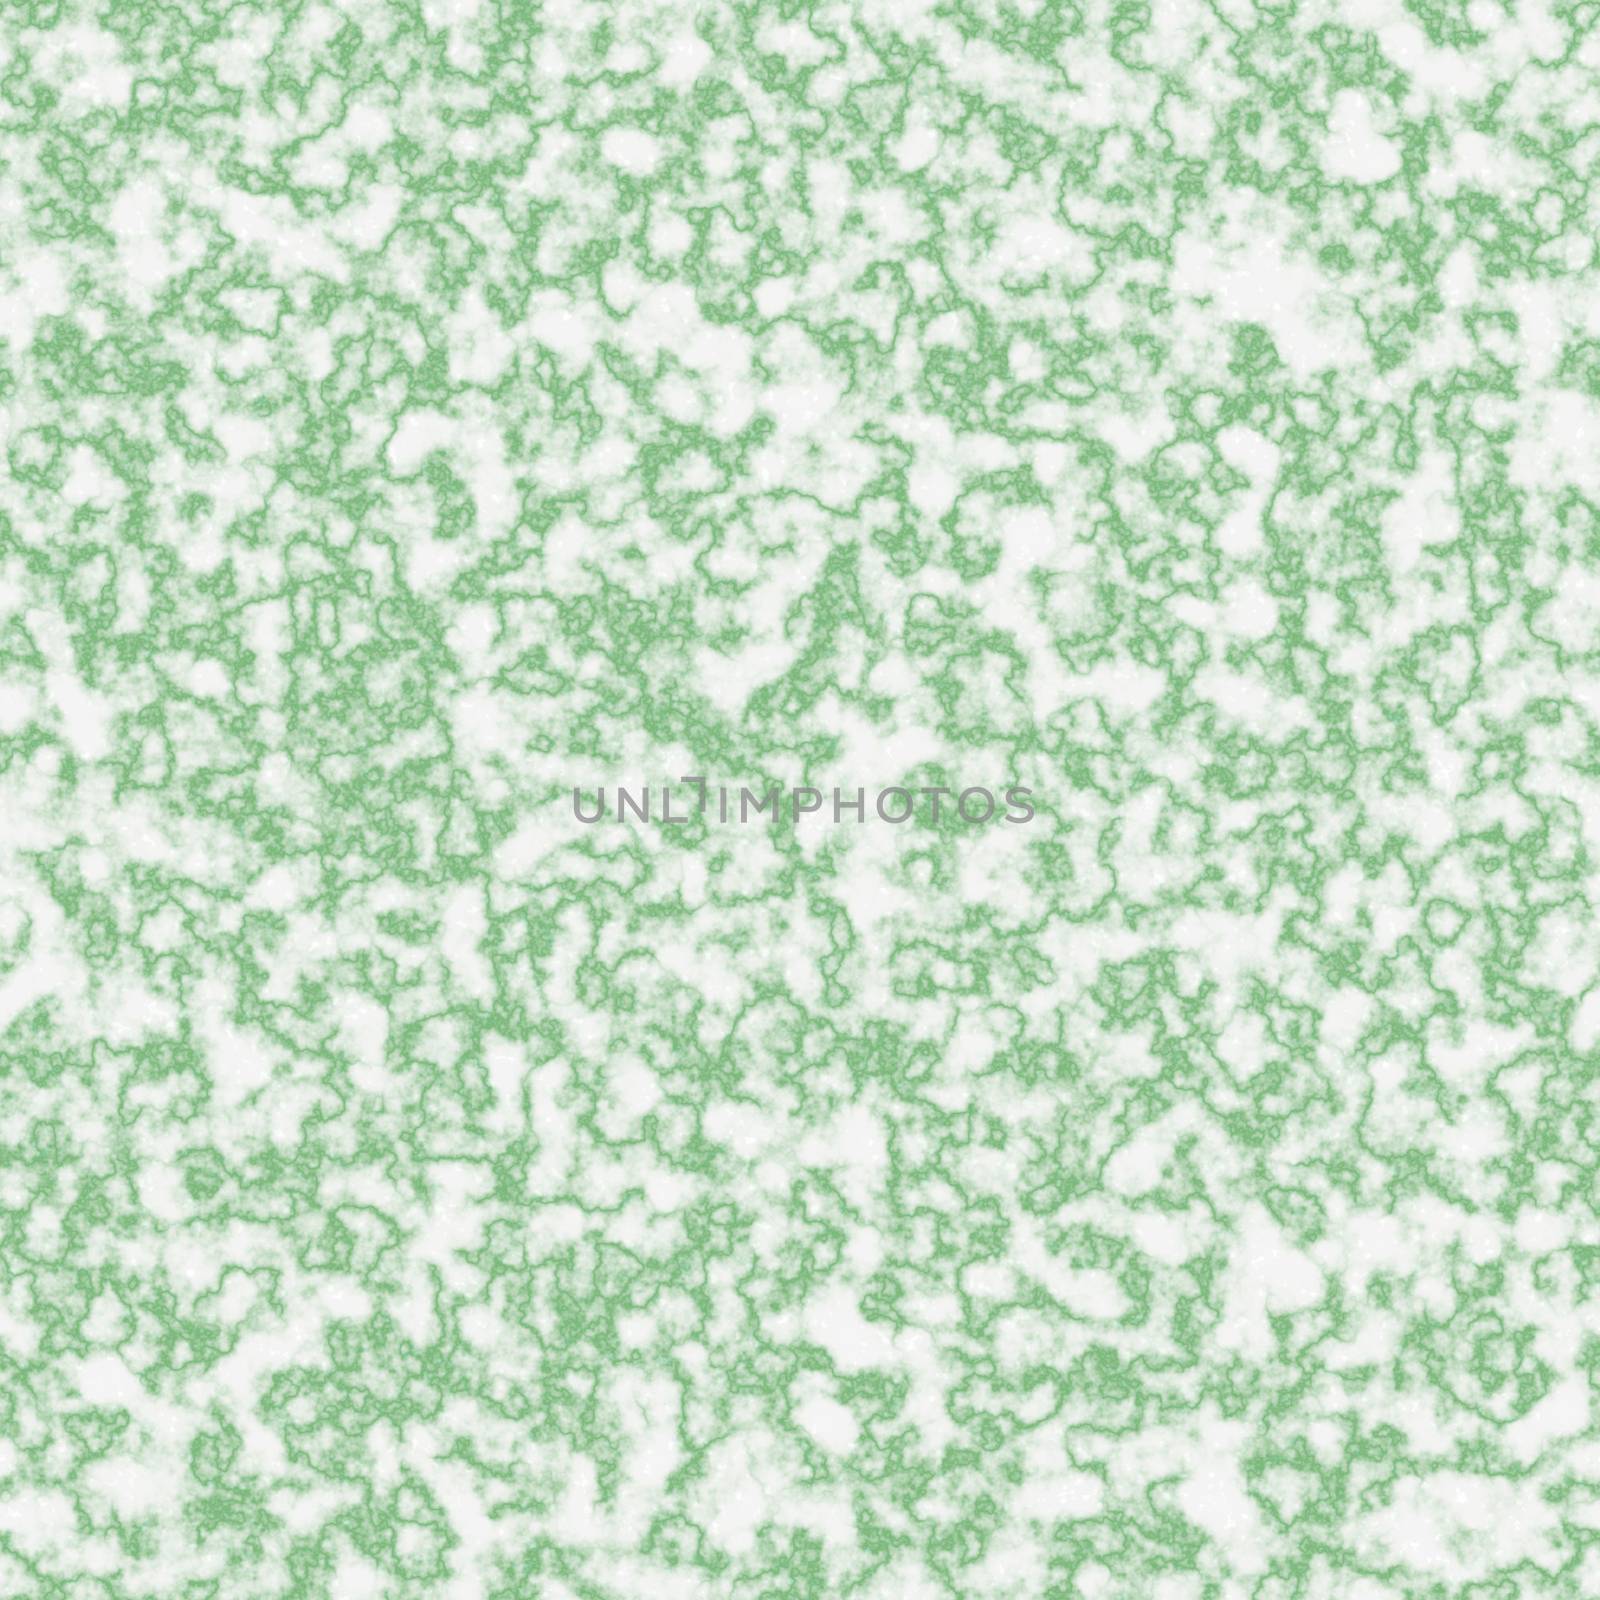 Green white marble realistic high resolution tileable seamless texture.